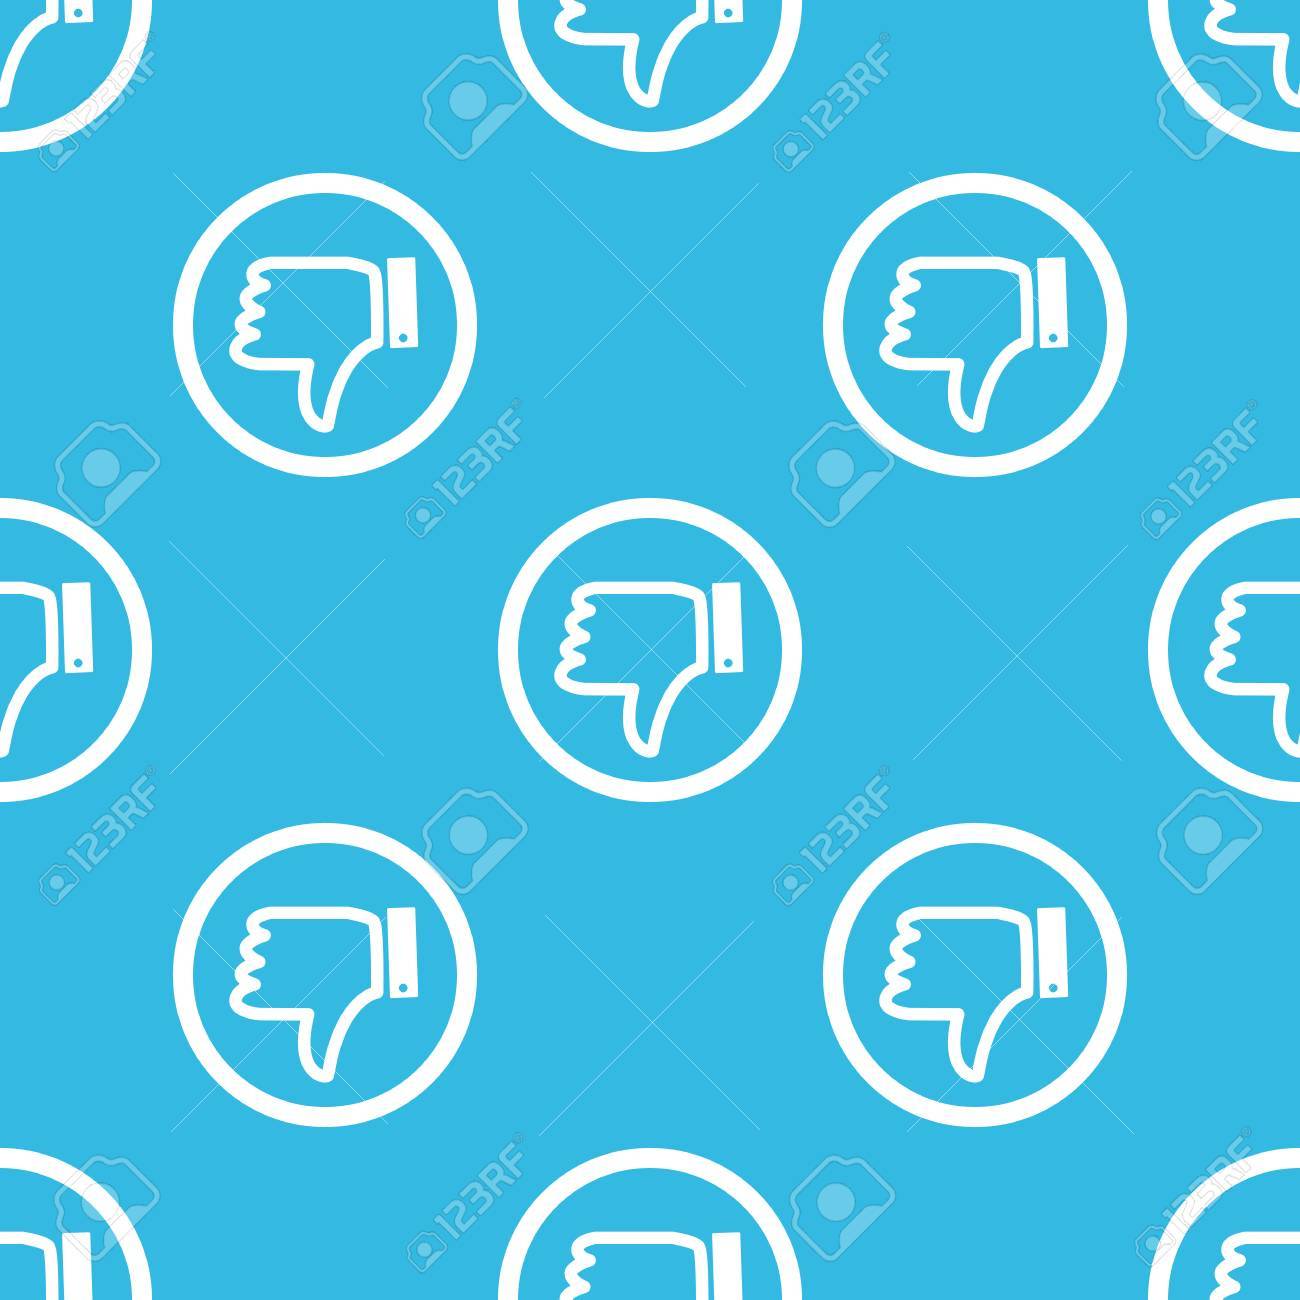 Image Of Dislike Symbol In Circle Repeated On Blue Background